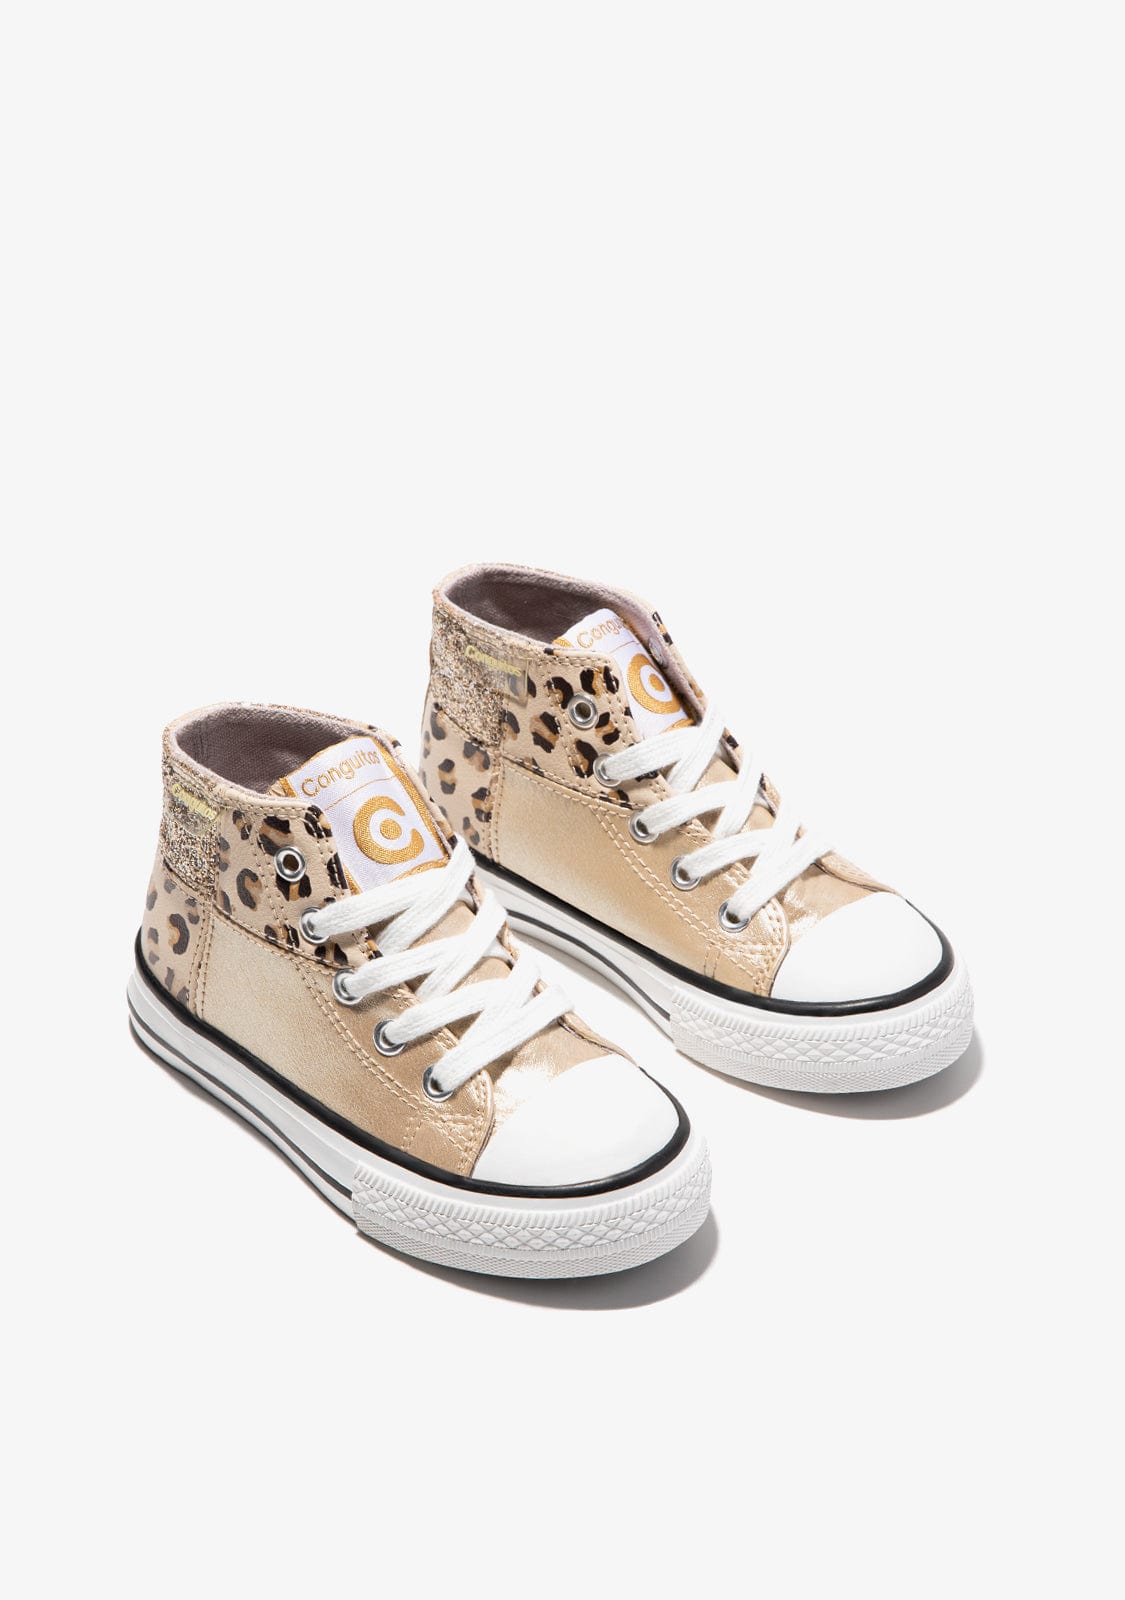 CONGUITOS Shoes Girl's Gold Patchwork Hi-Top Sneakers